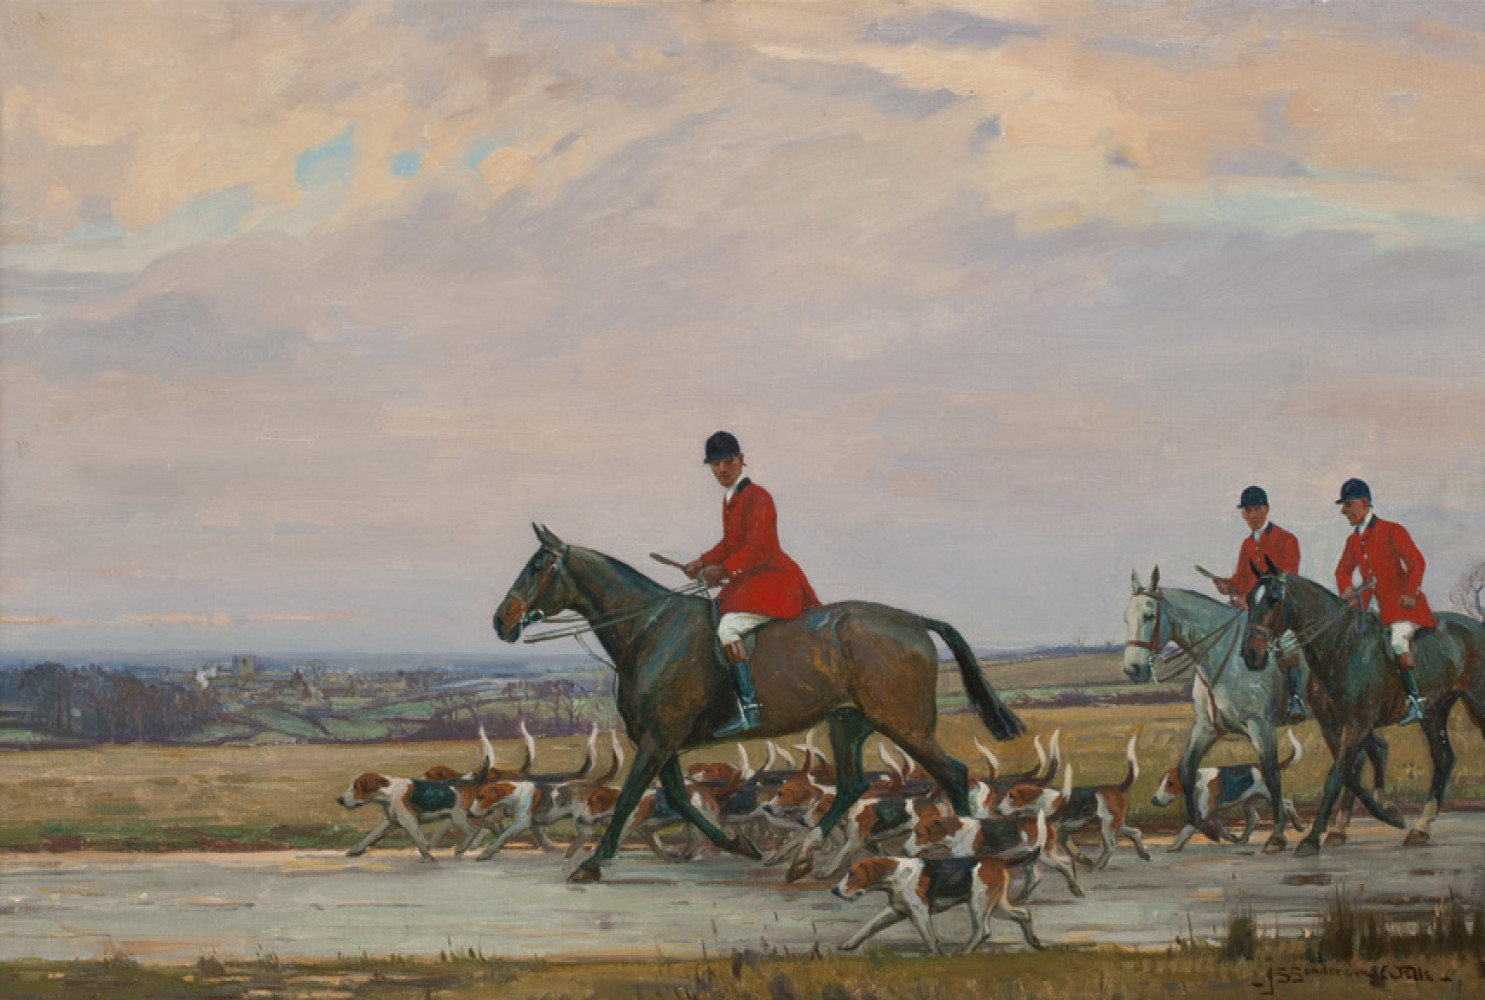 Jogging Home, c. 1920, By John Sanderson Wells (British, 1872—1943); Oil on canvas; 24 x 16 inches; Image courtesy of Penkhus Collection	 